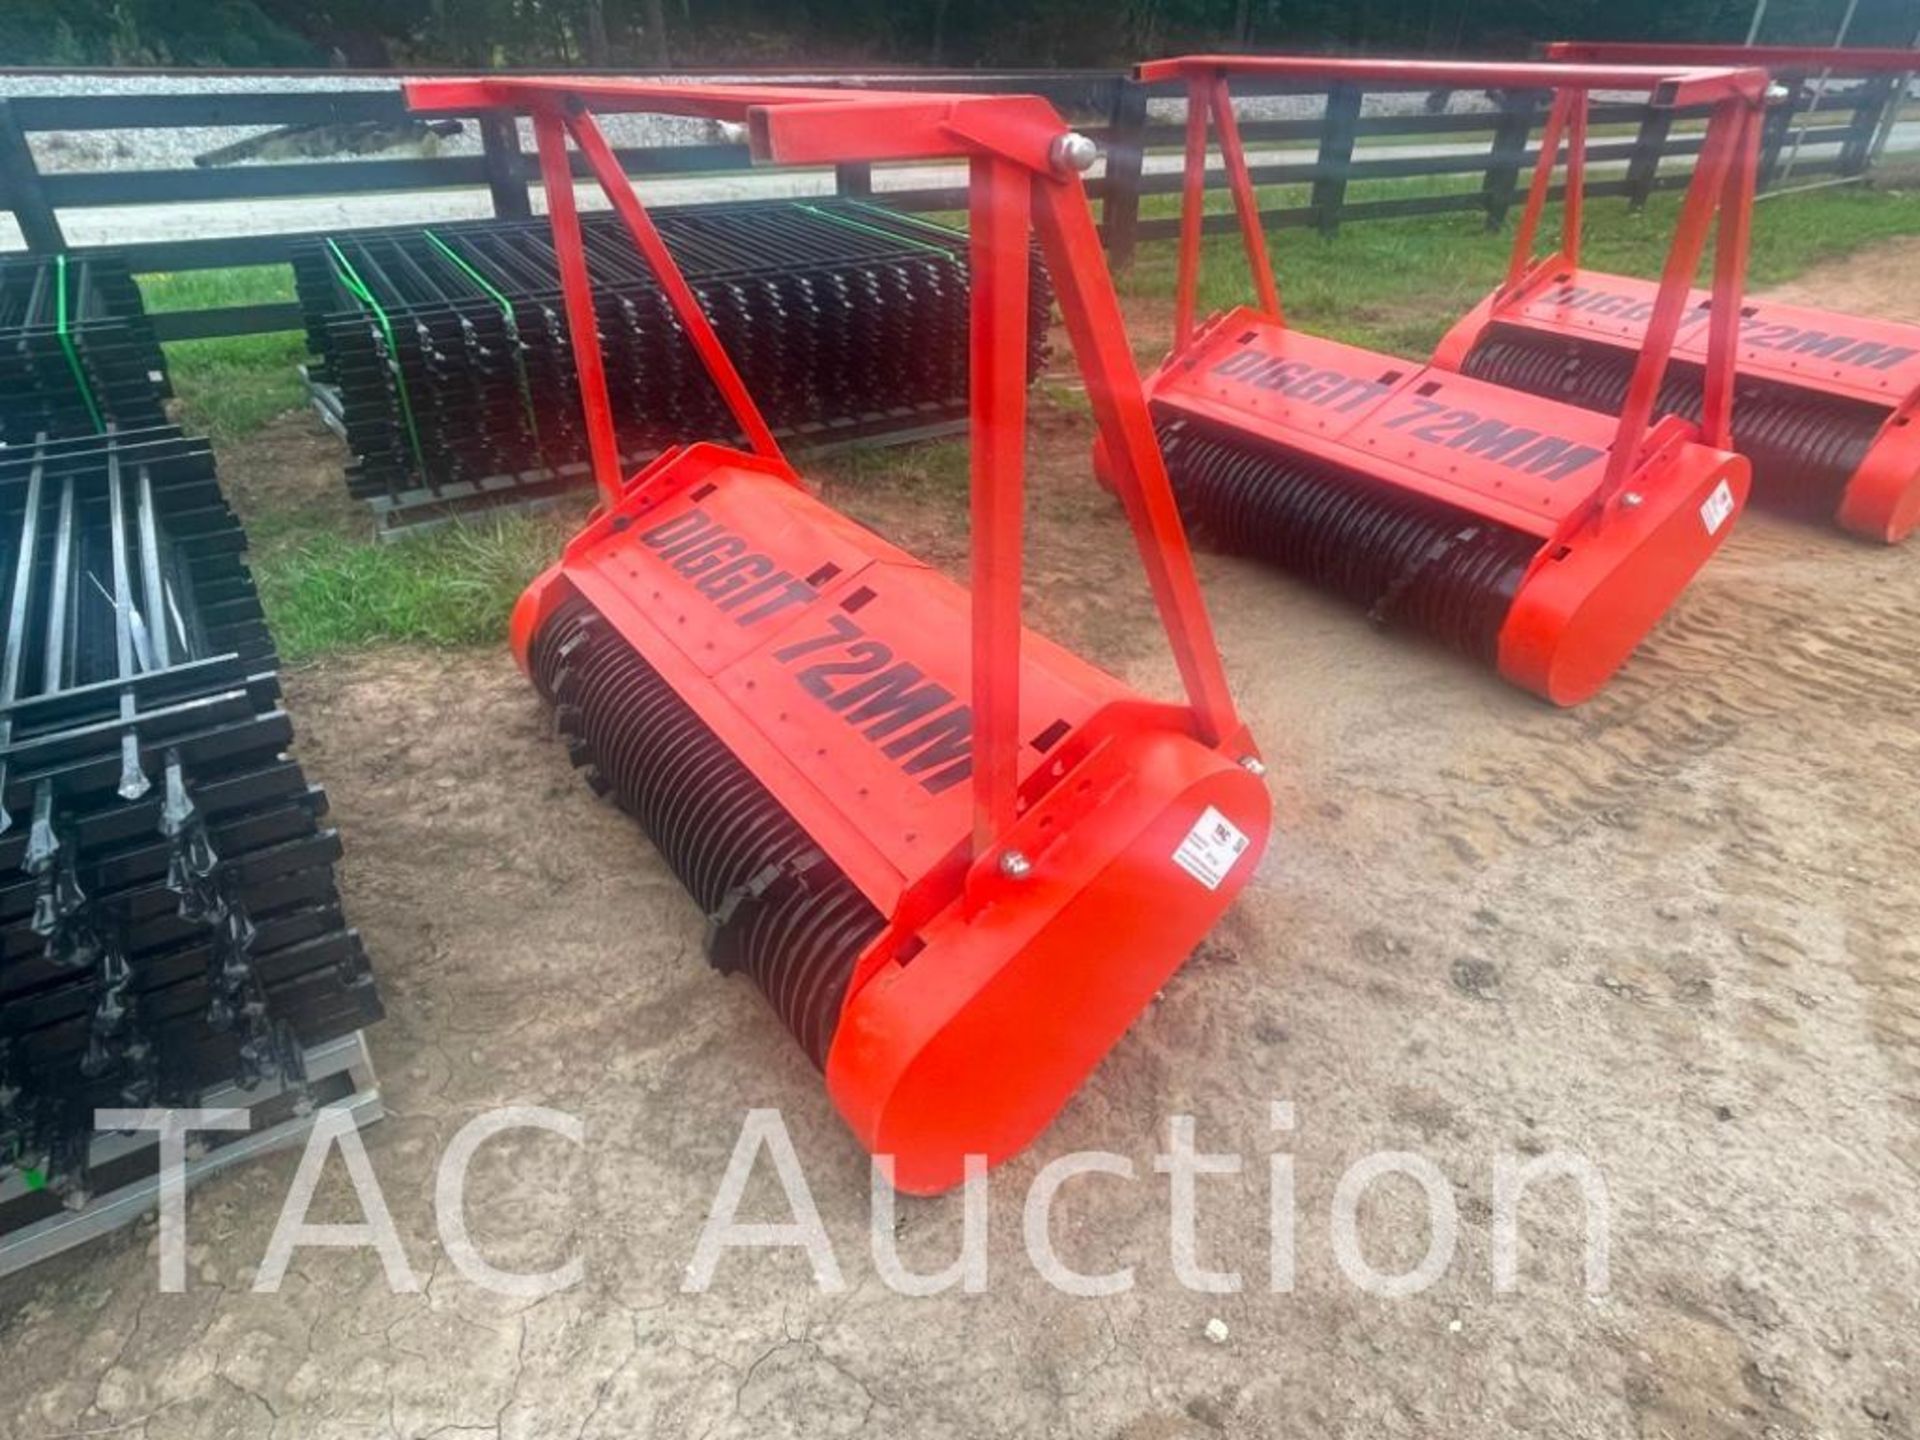 New Skid Steer Mulching Head Attachment - Image 2 of 3